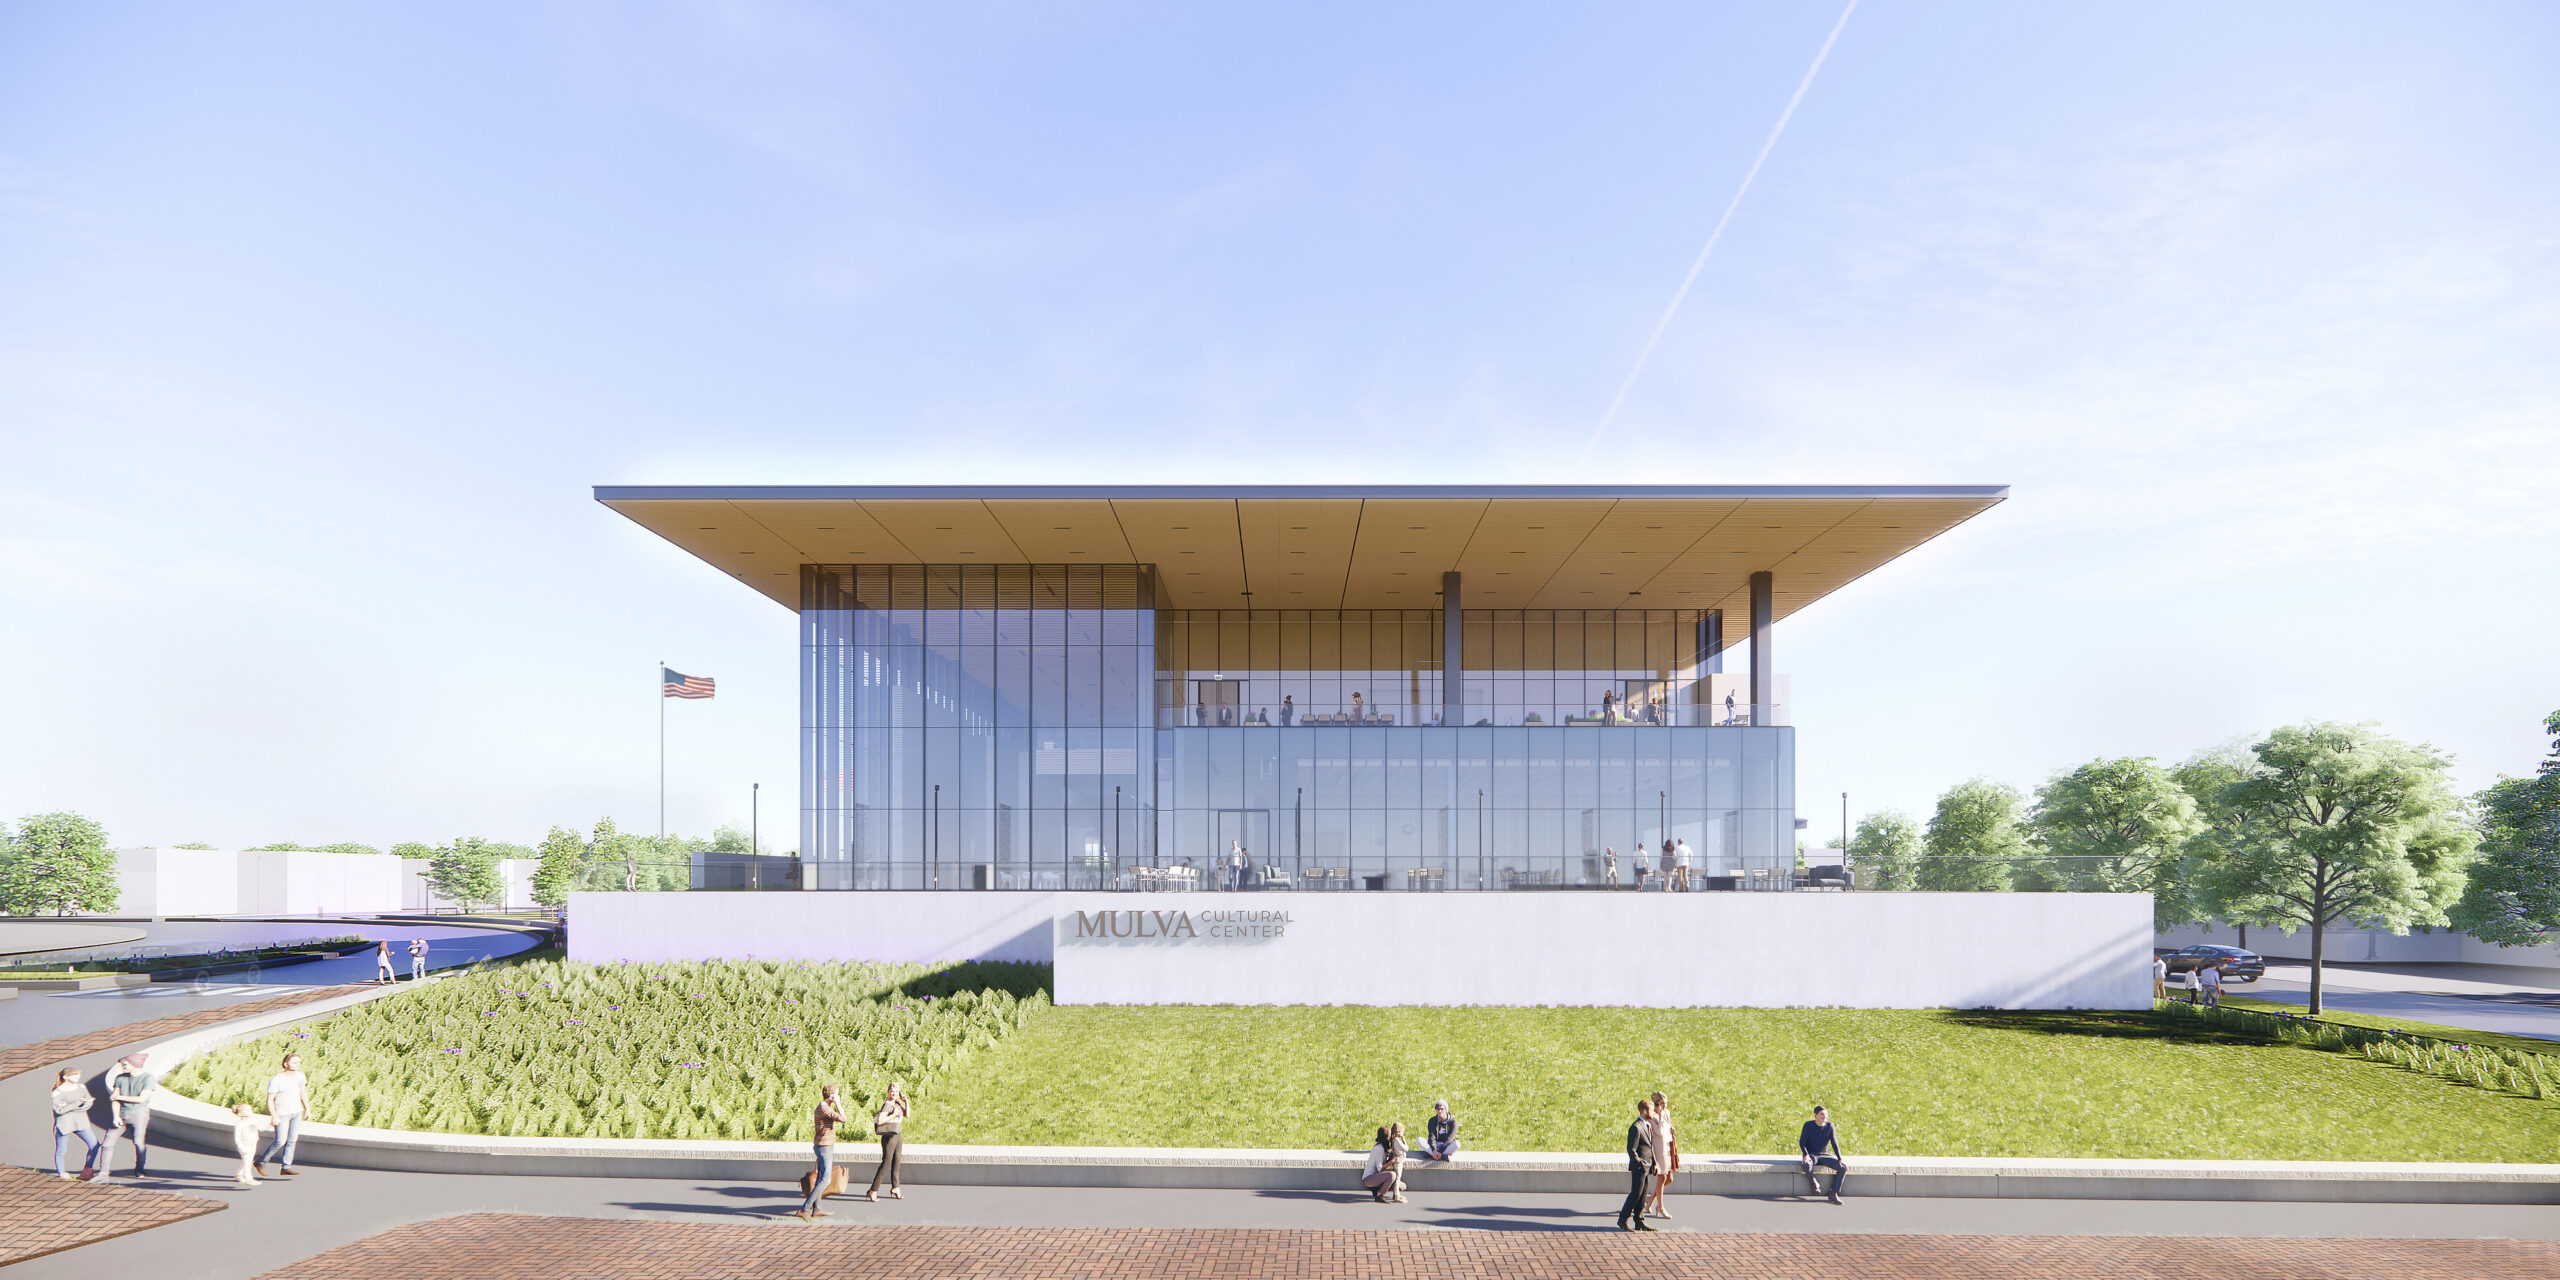 A rendering of the Mulva Cultural Center